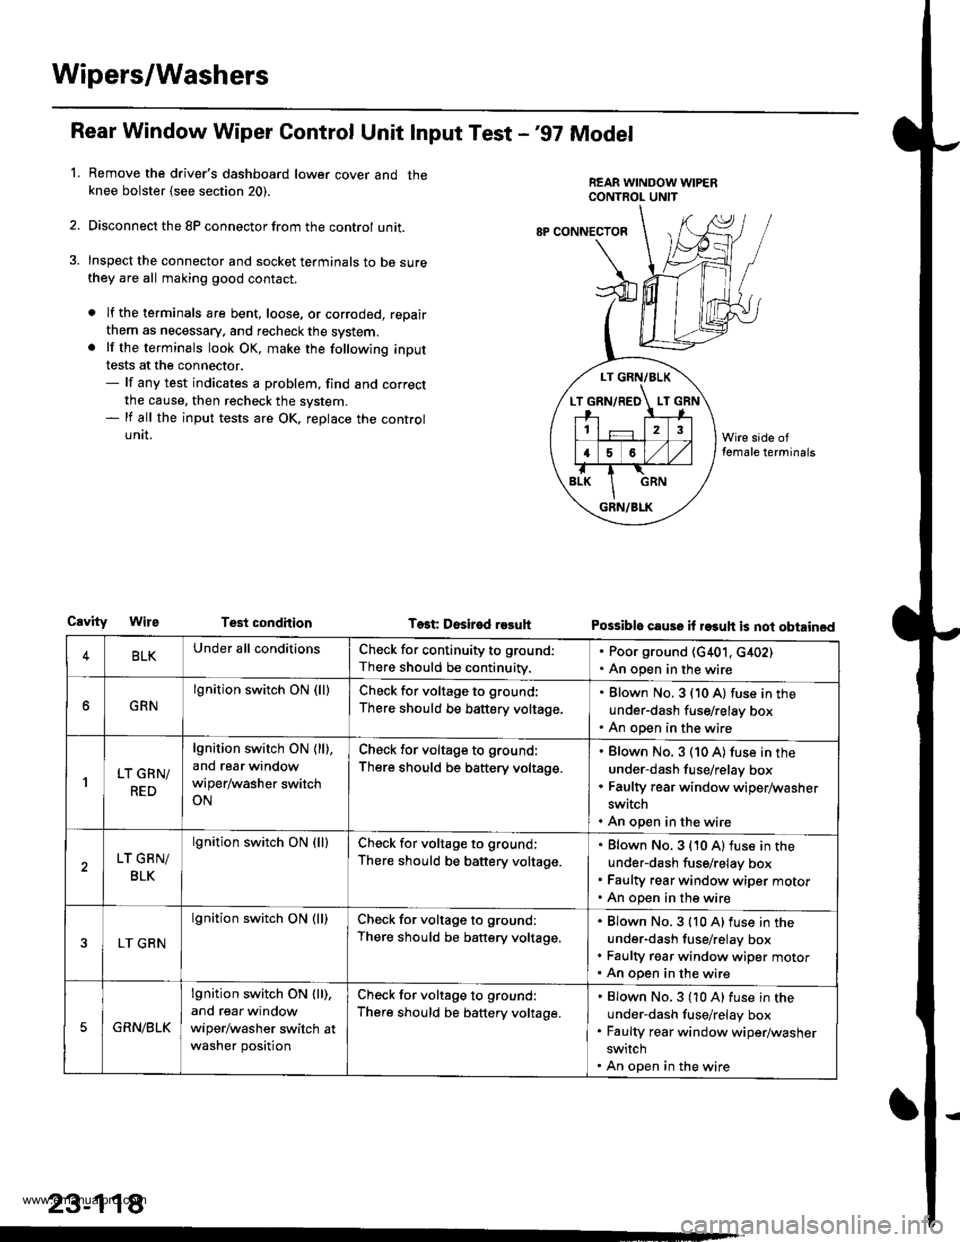 HONDA CR-V 1998 RD1-RD3 / 1.G Repair Manual 
Wipers/Washers
Rear Window Wiper Gontrol Unit lnput Test -97 Model
Remove the drivers dashboard lower cover and theknee bolster {see section 20).
Disconnect the 8P connector from the control unit.
